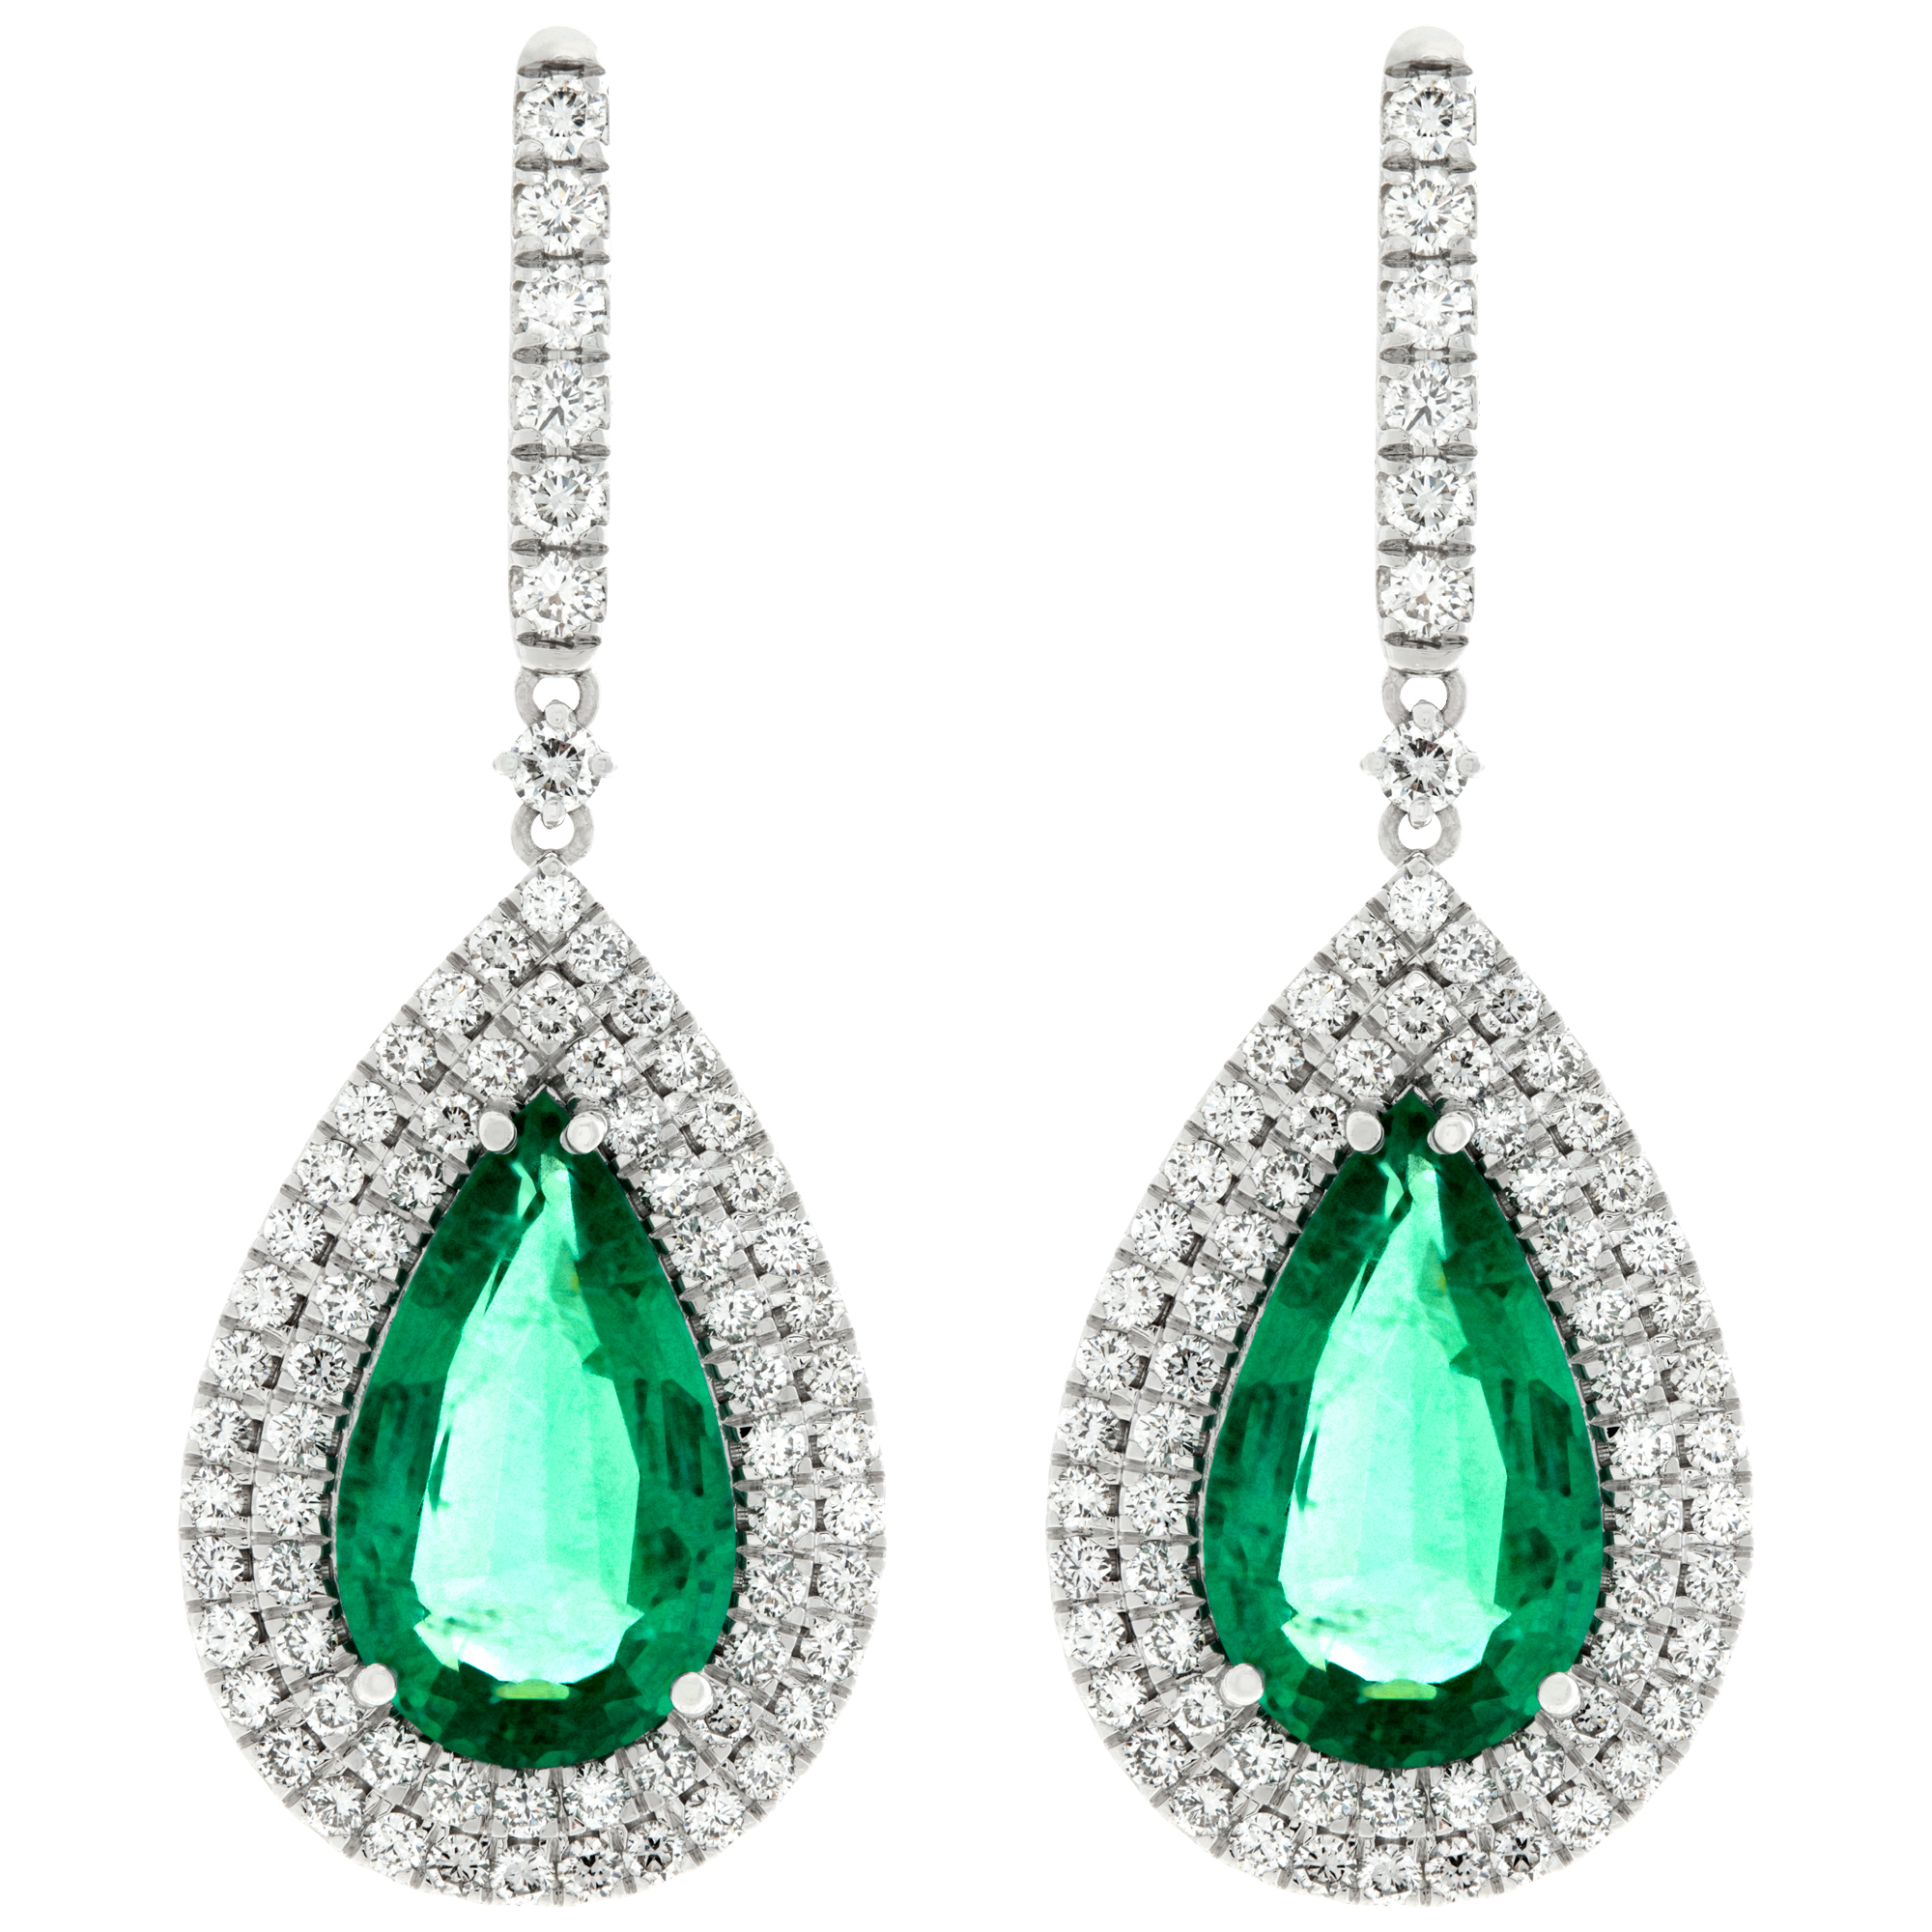 Emerald and diamond earrings in 18k white gold image 1